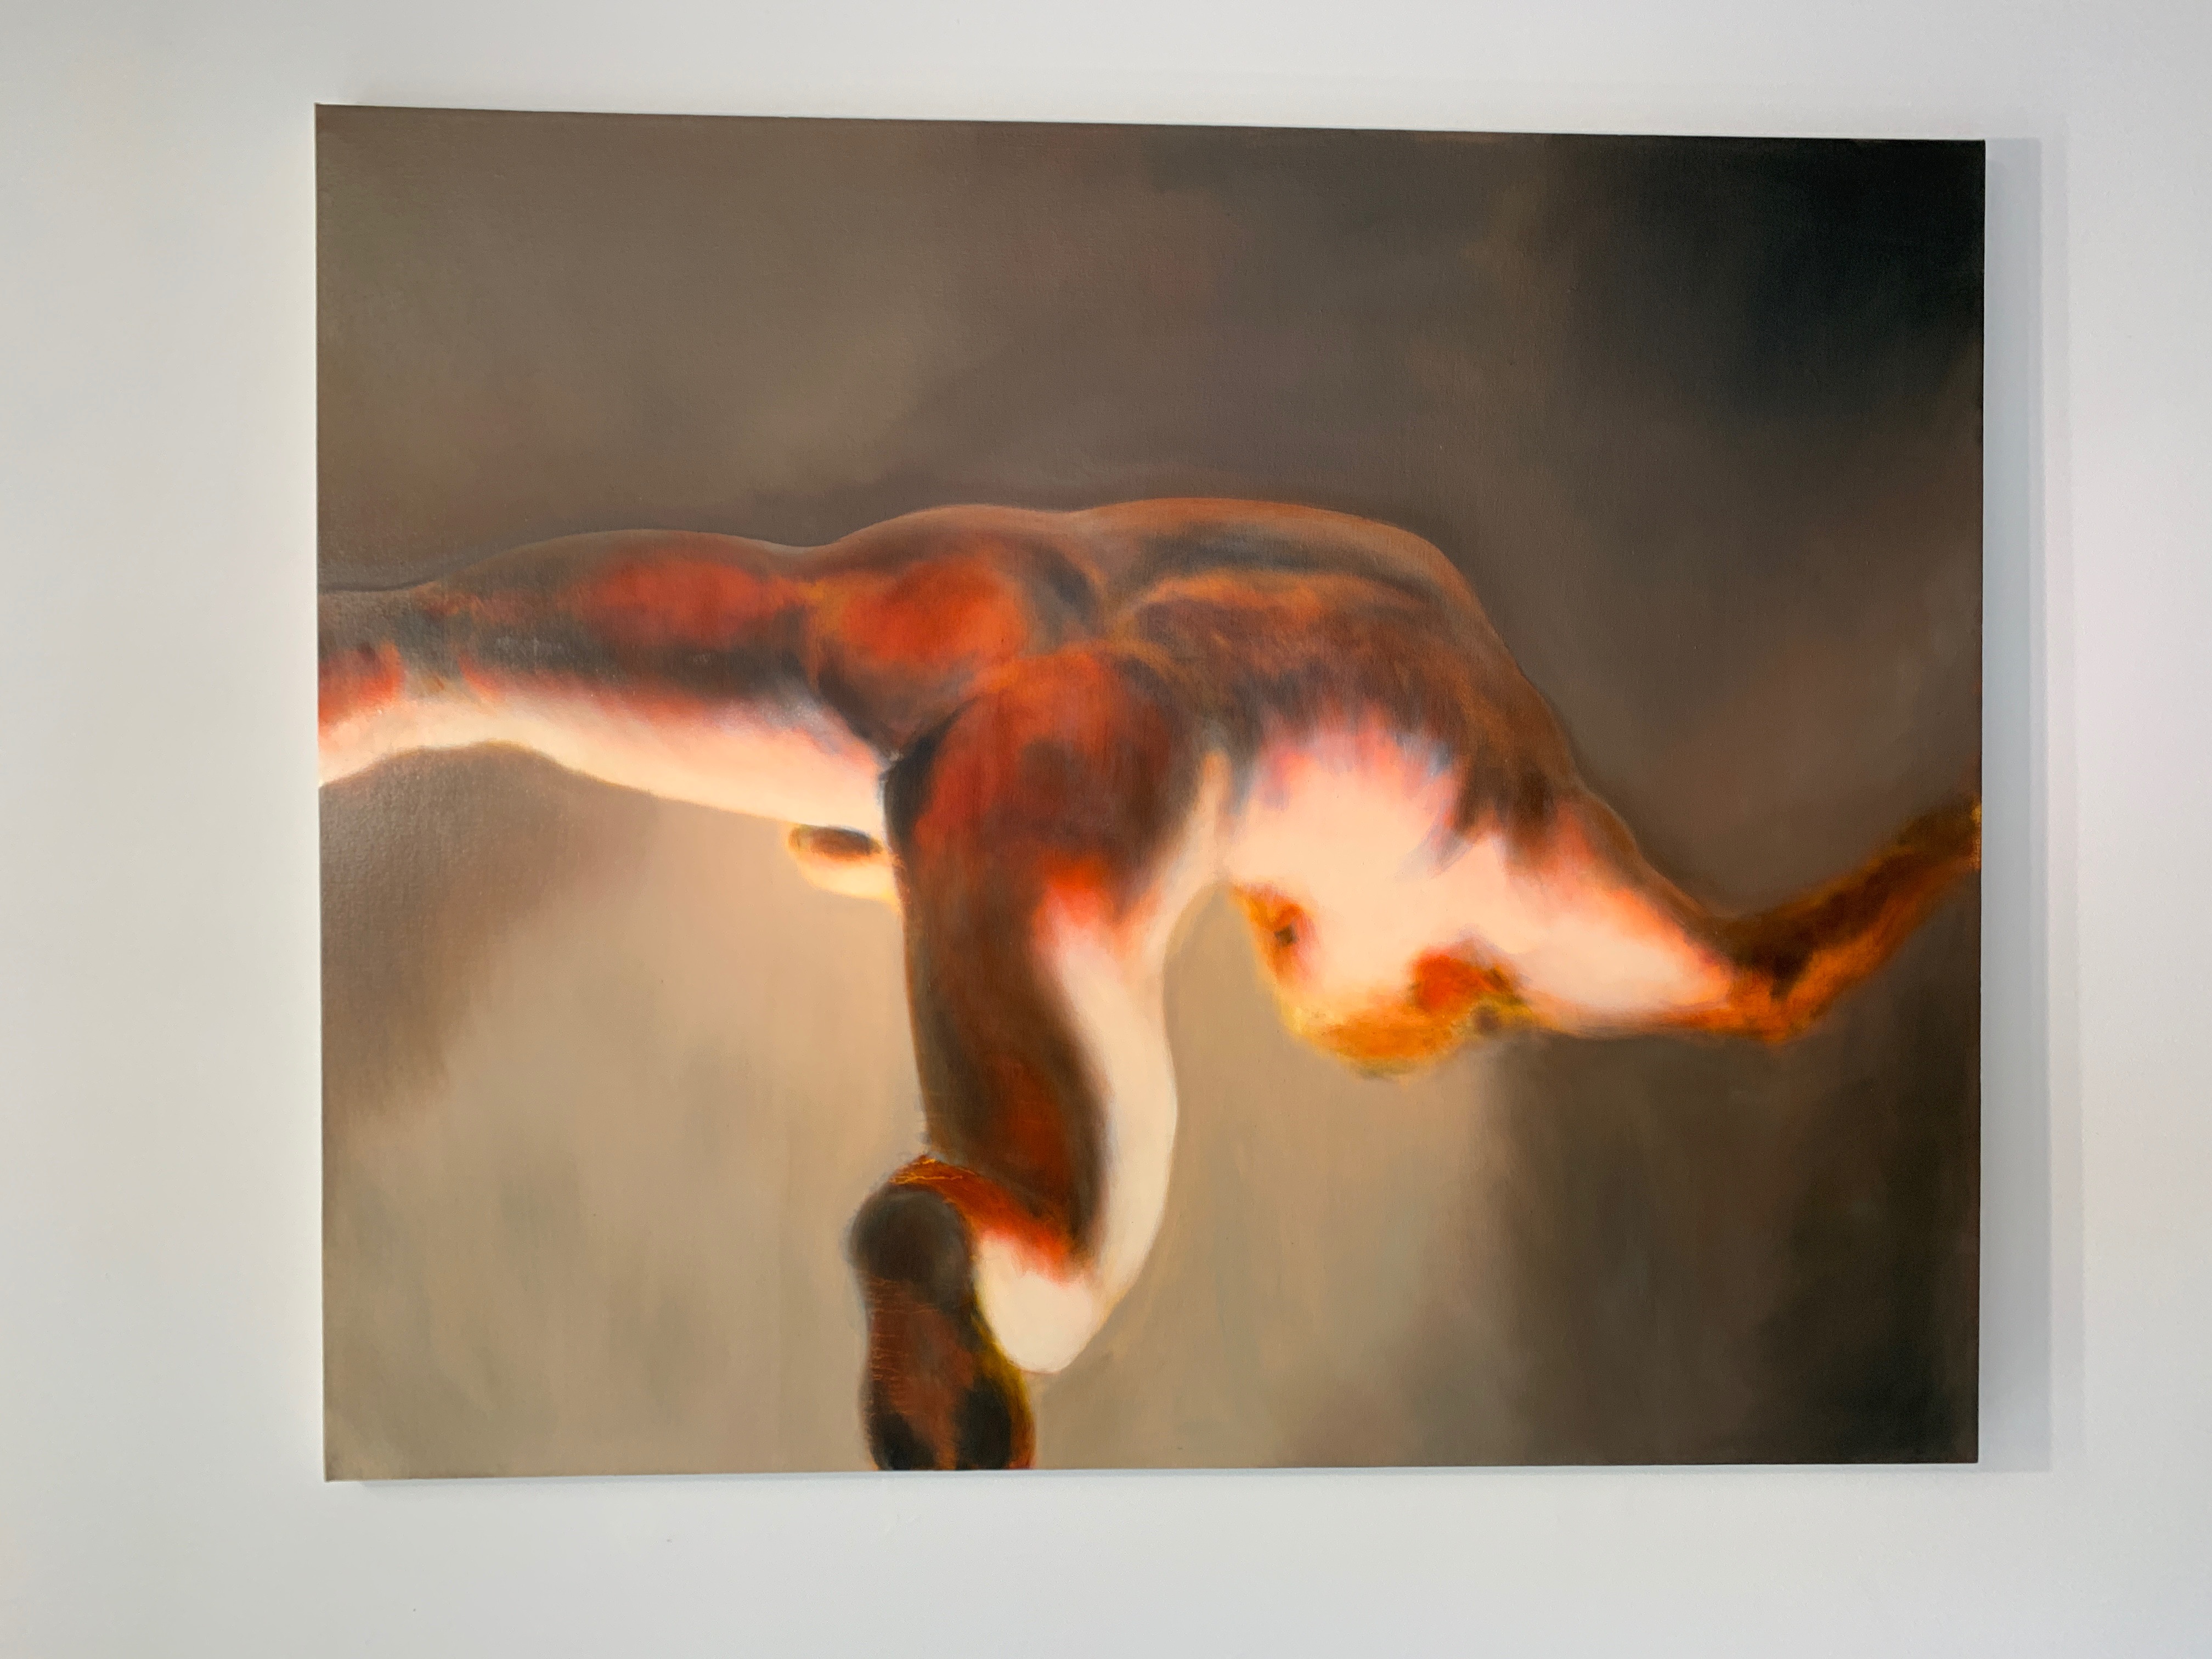 Failed Attempts in the Act of Falling Up No. 8, 2020. Oil on canvas, 60” x 36” by Karl Daum